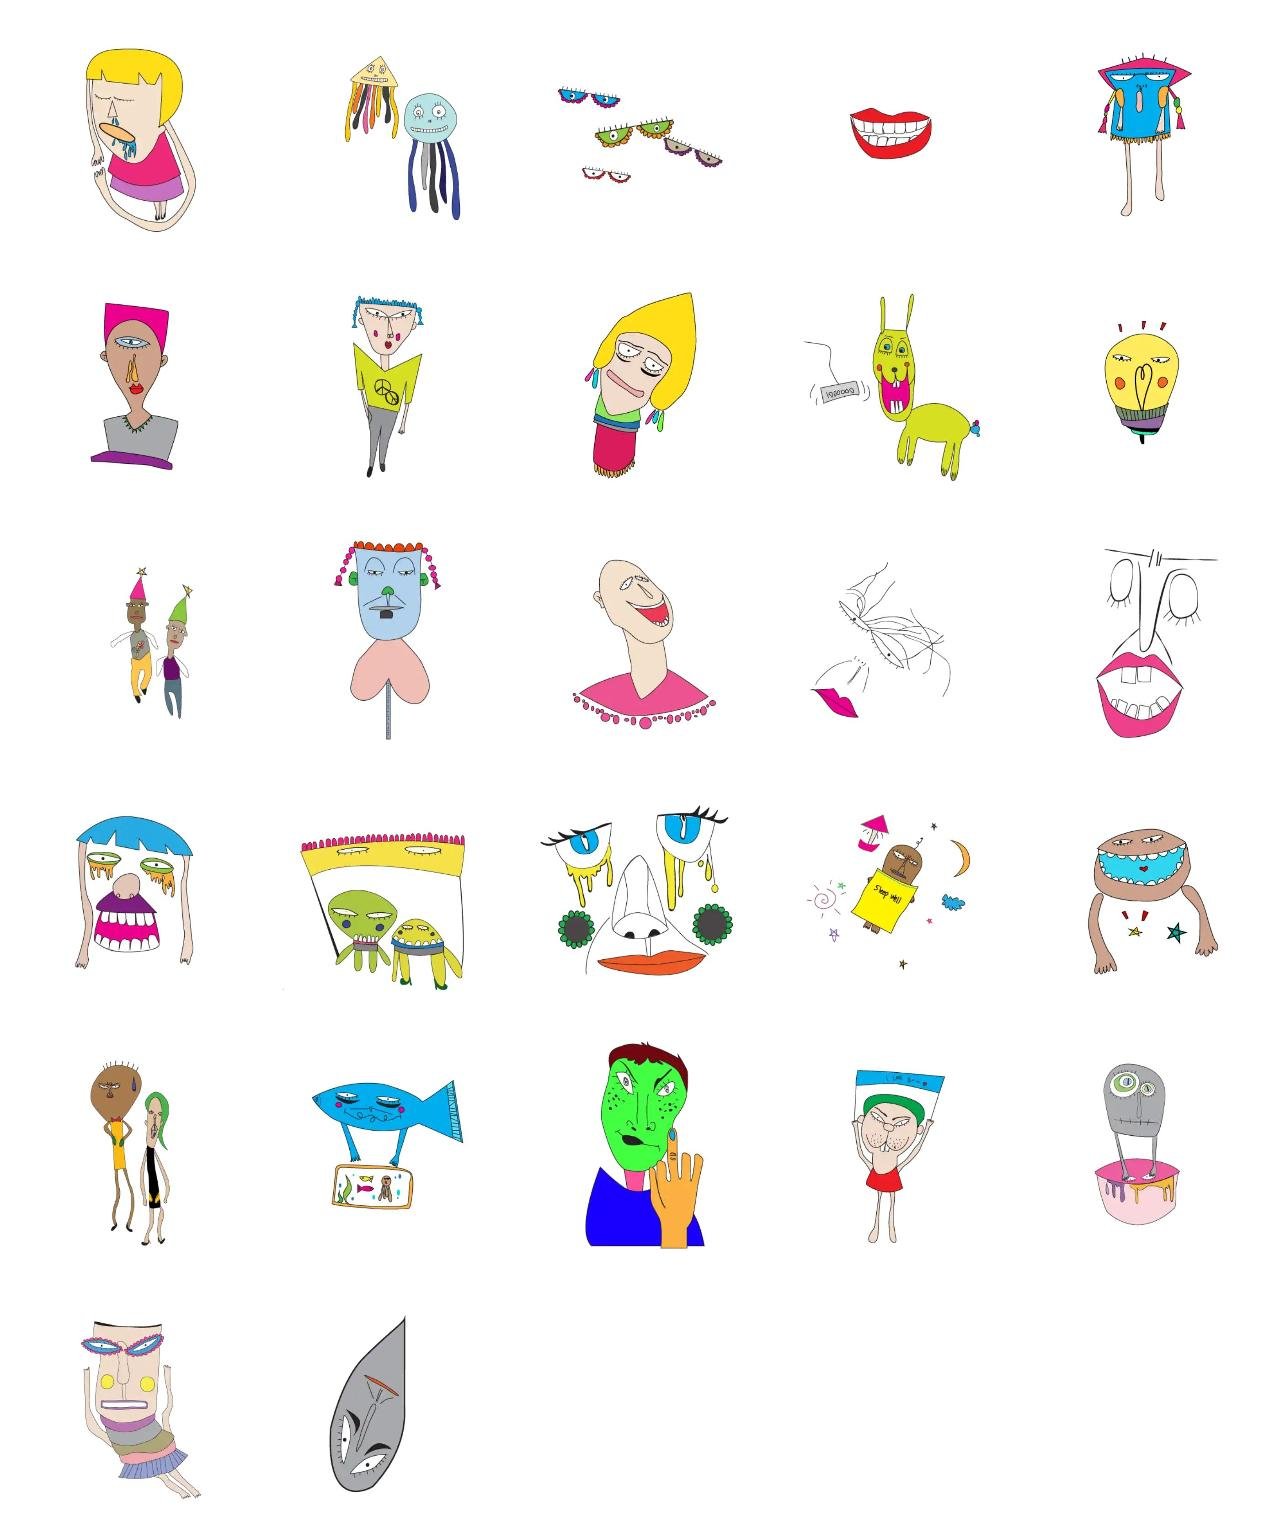 Funny basket Gag sticker pack for Whatsapp, Telegram, Signal, and others chatting and message apps